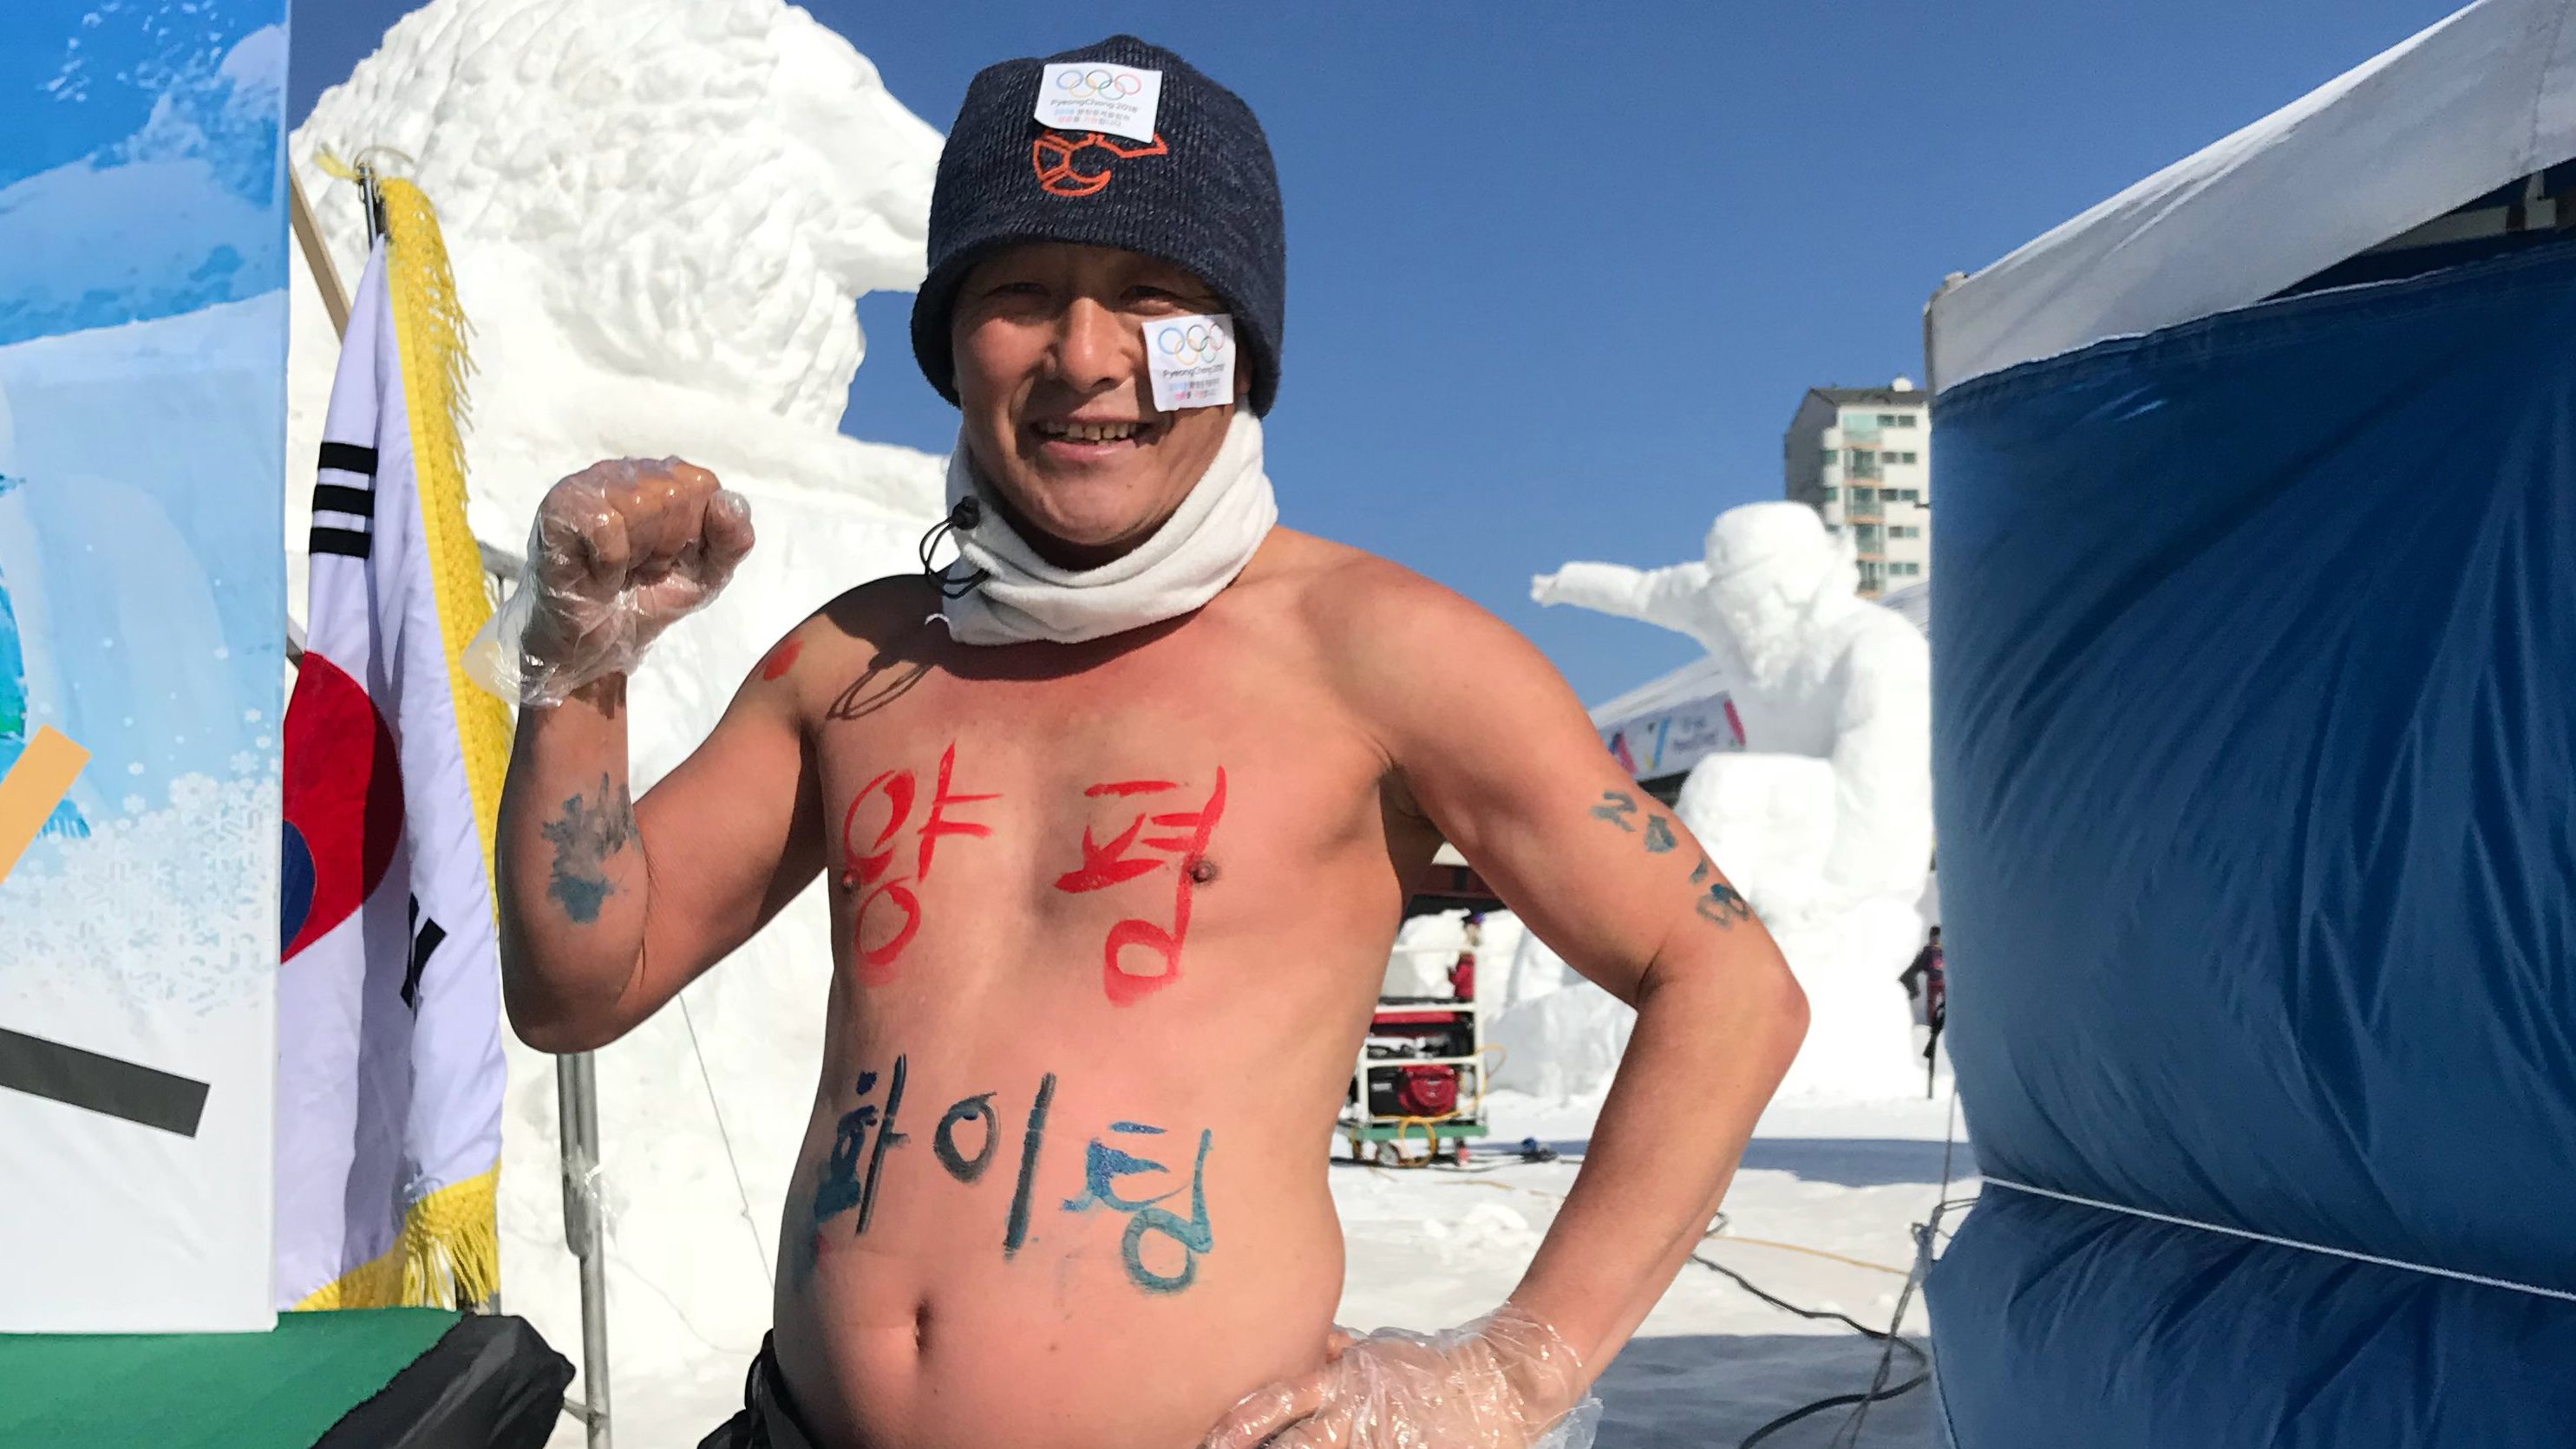 A runner used his chest to declare "Go Yangpyeong!" -- a region in South Korea. 